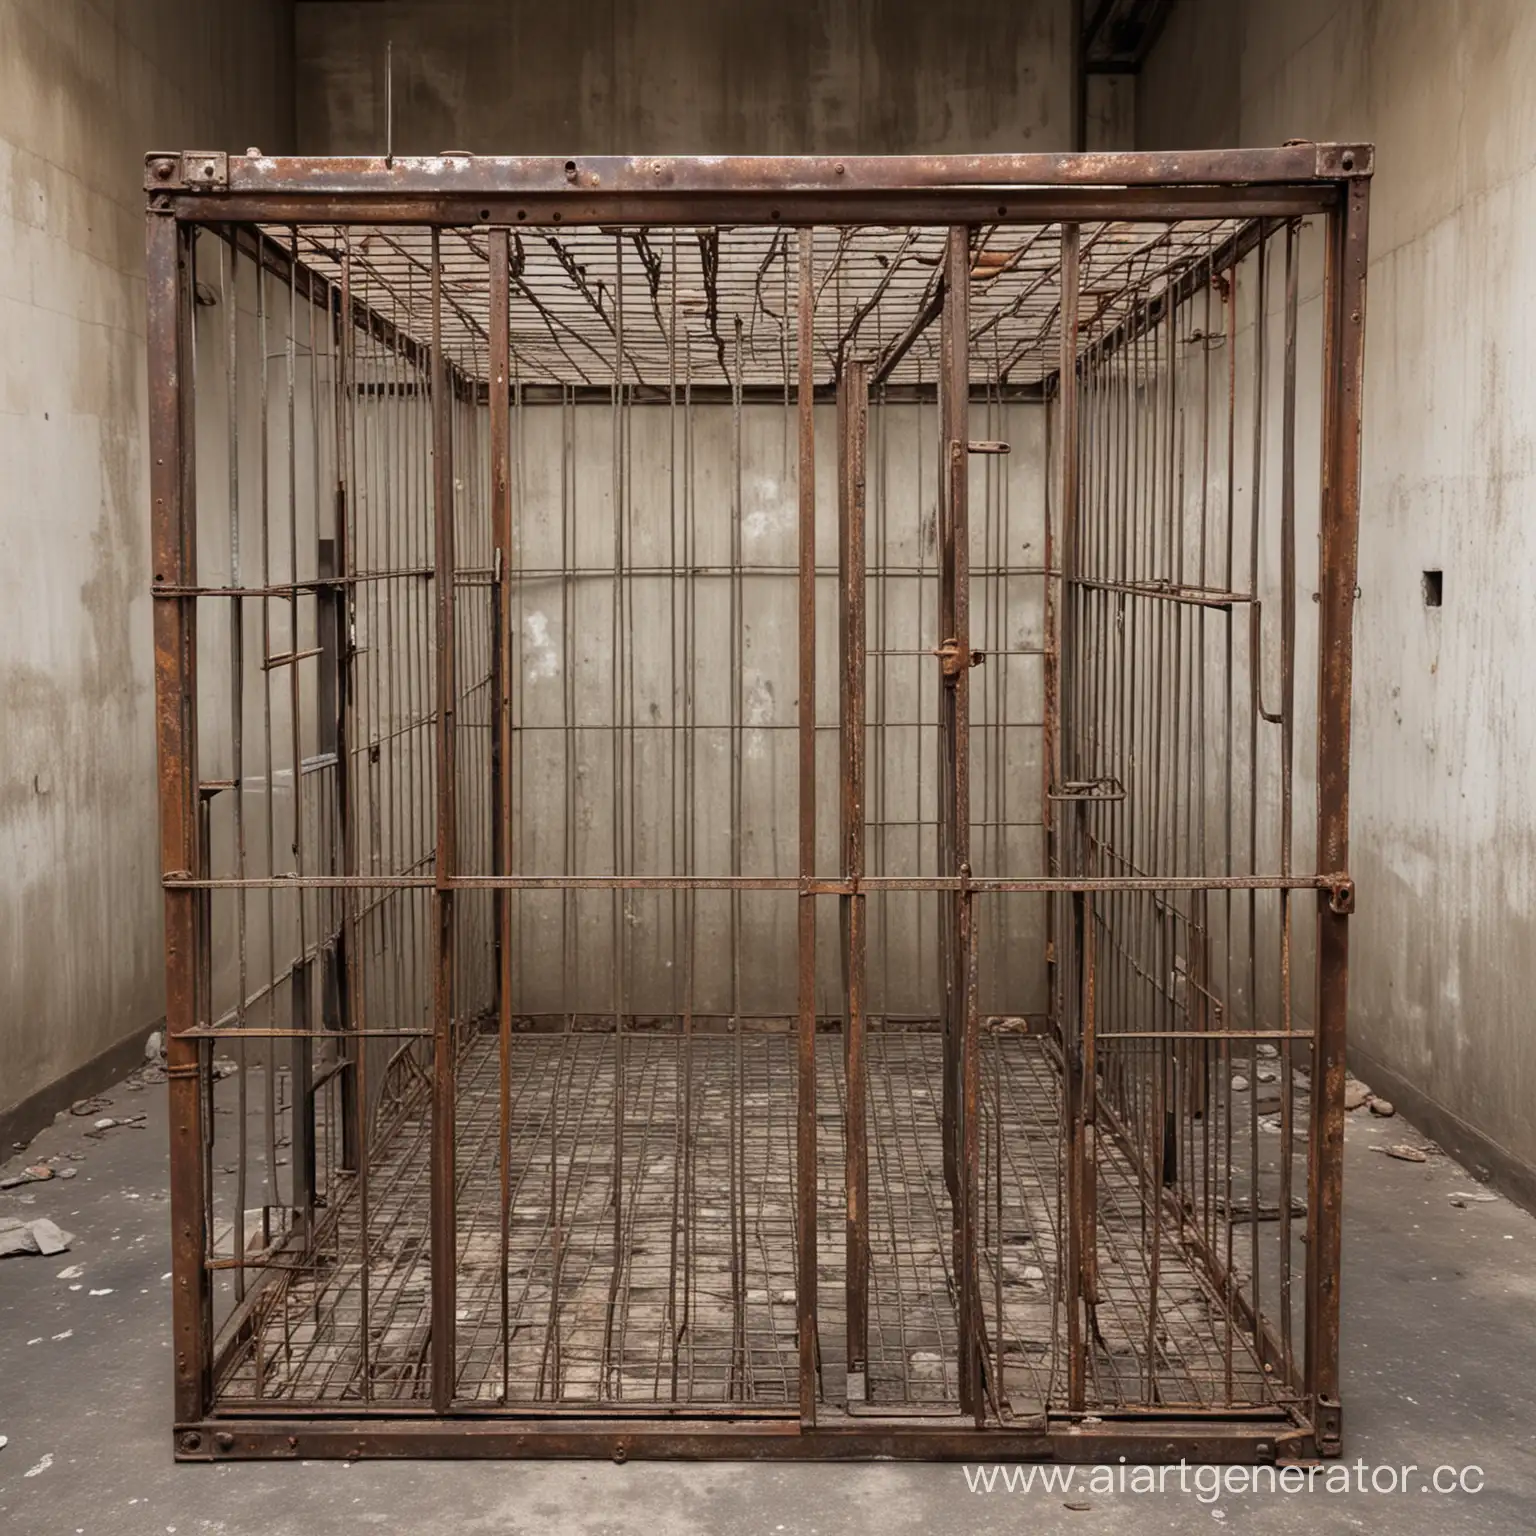 Abandoned-Rusty-Metal-Cage-with-Empty-Interior